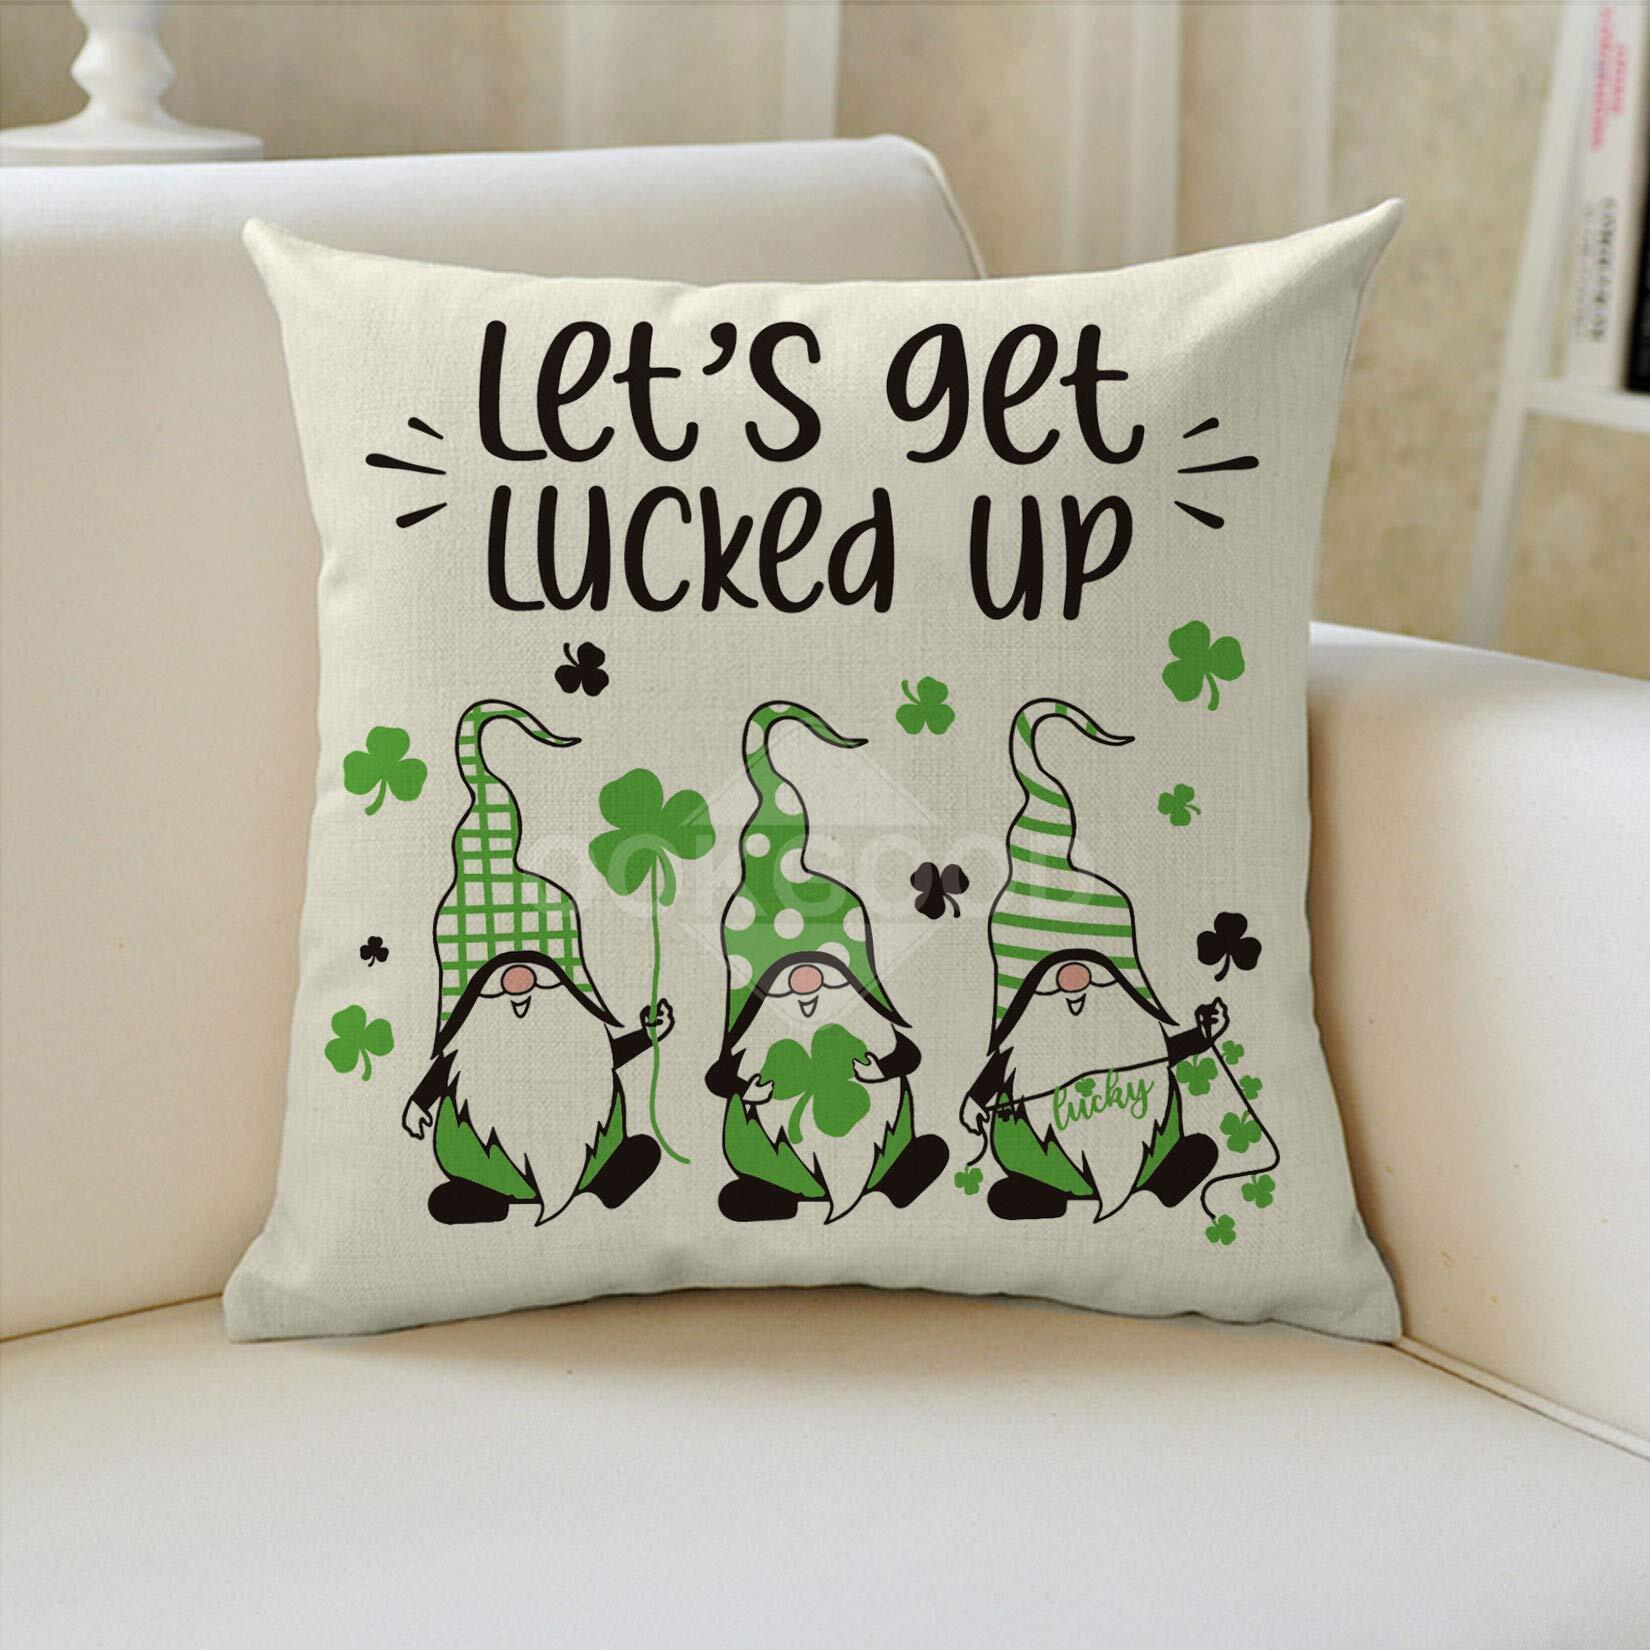 Let's Get Lucked Up - Adorable Gnome Pillowcase